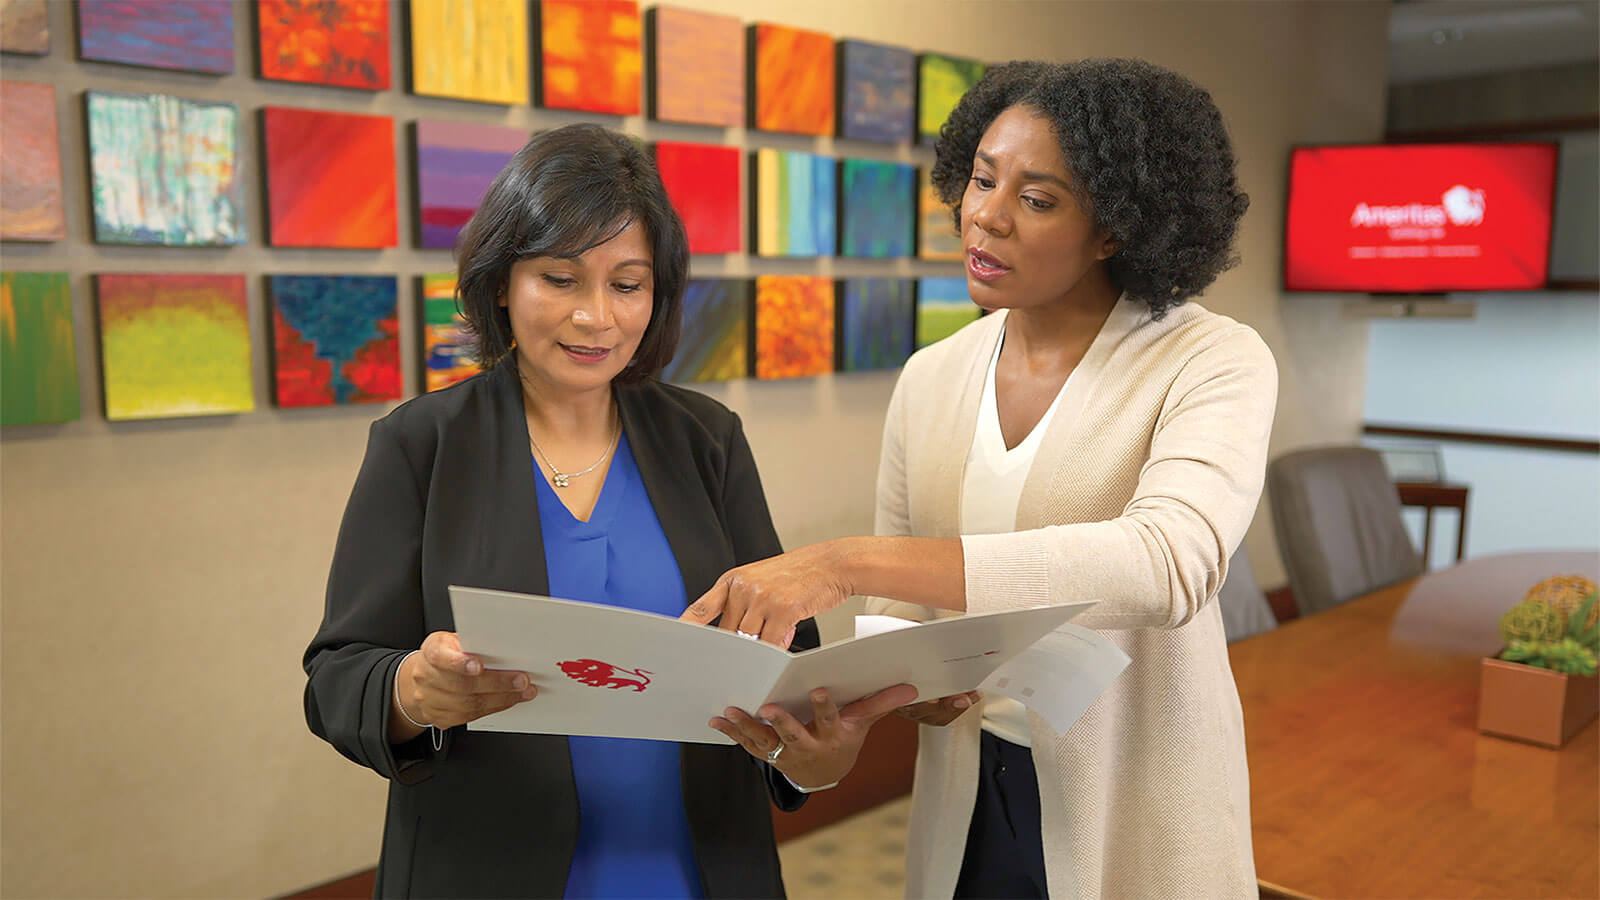 A financial professional explains the benefits of whole life insurance with her client while reviewing the client’s paperwork in a conference room.